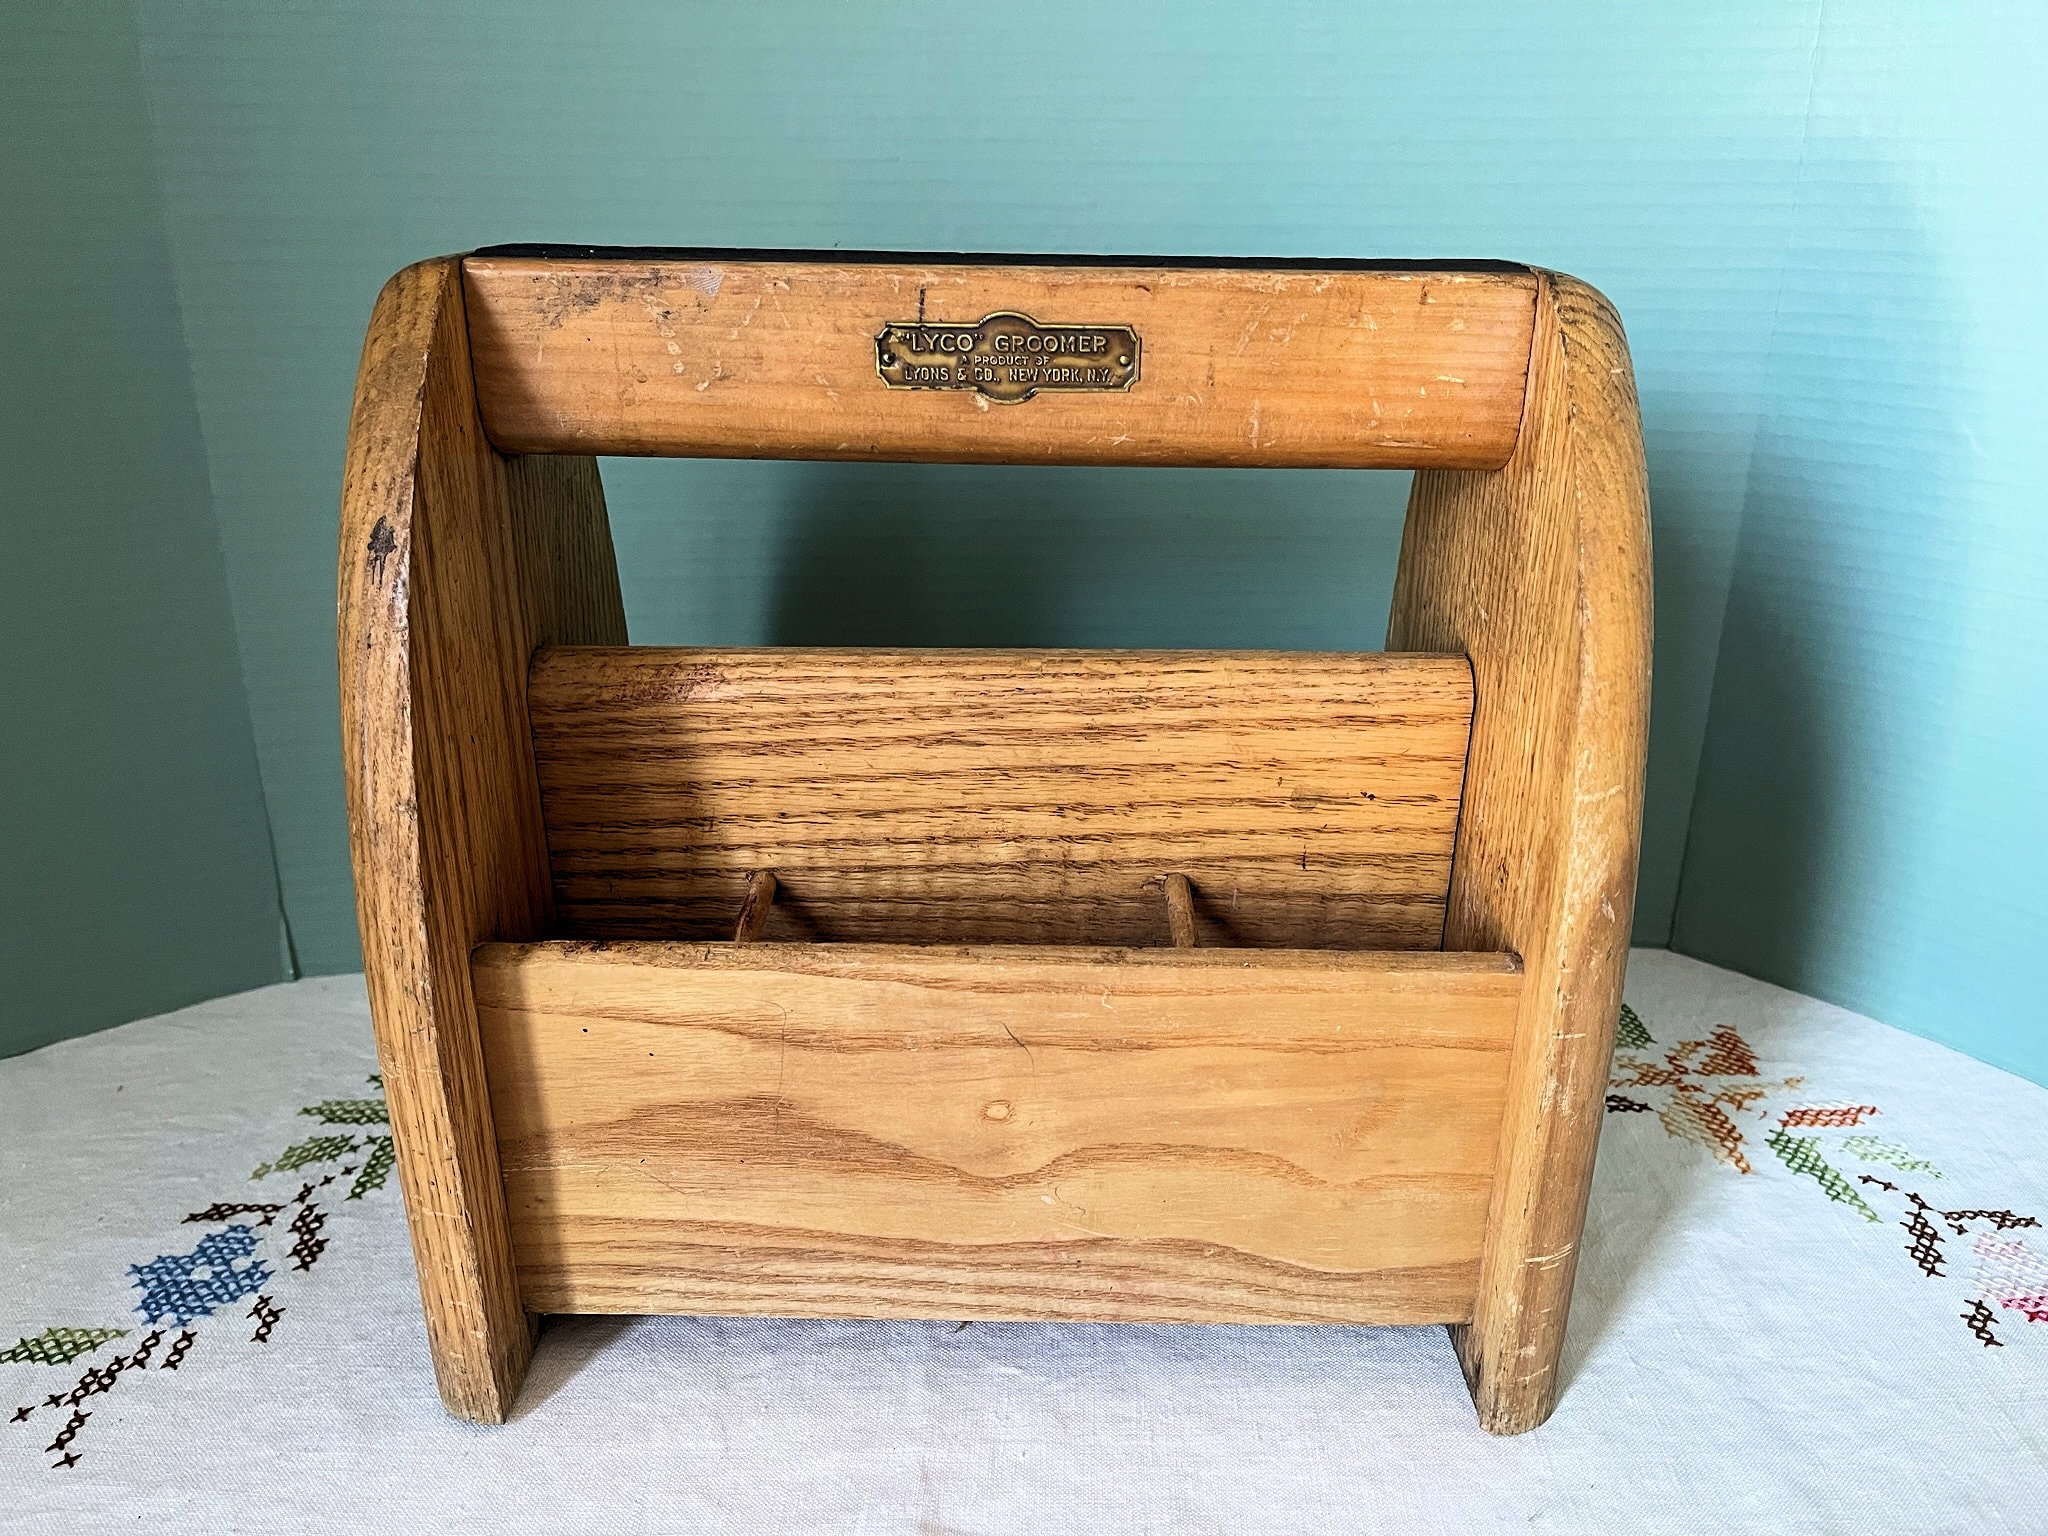 Vintage Wood Shoe Shine Box  Recycling the Past - Architectural